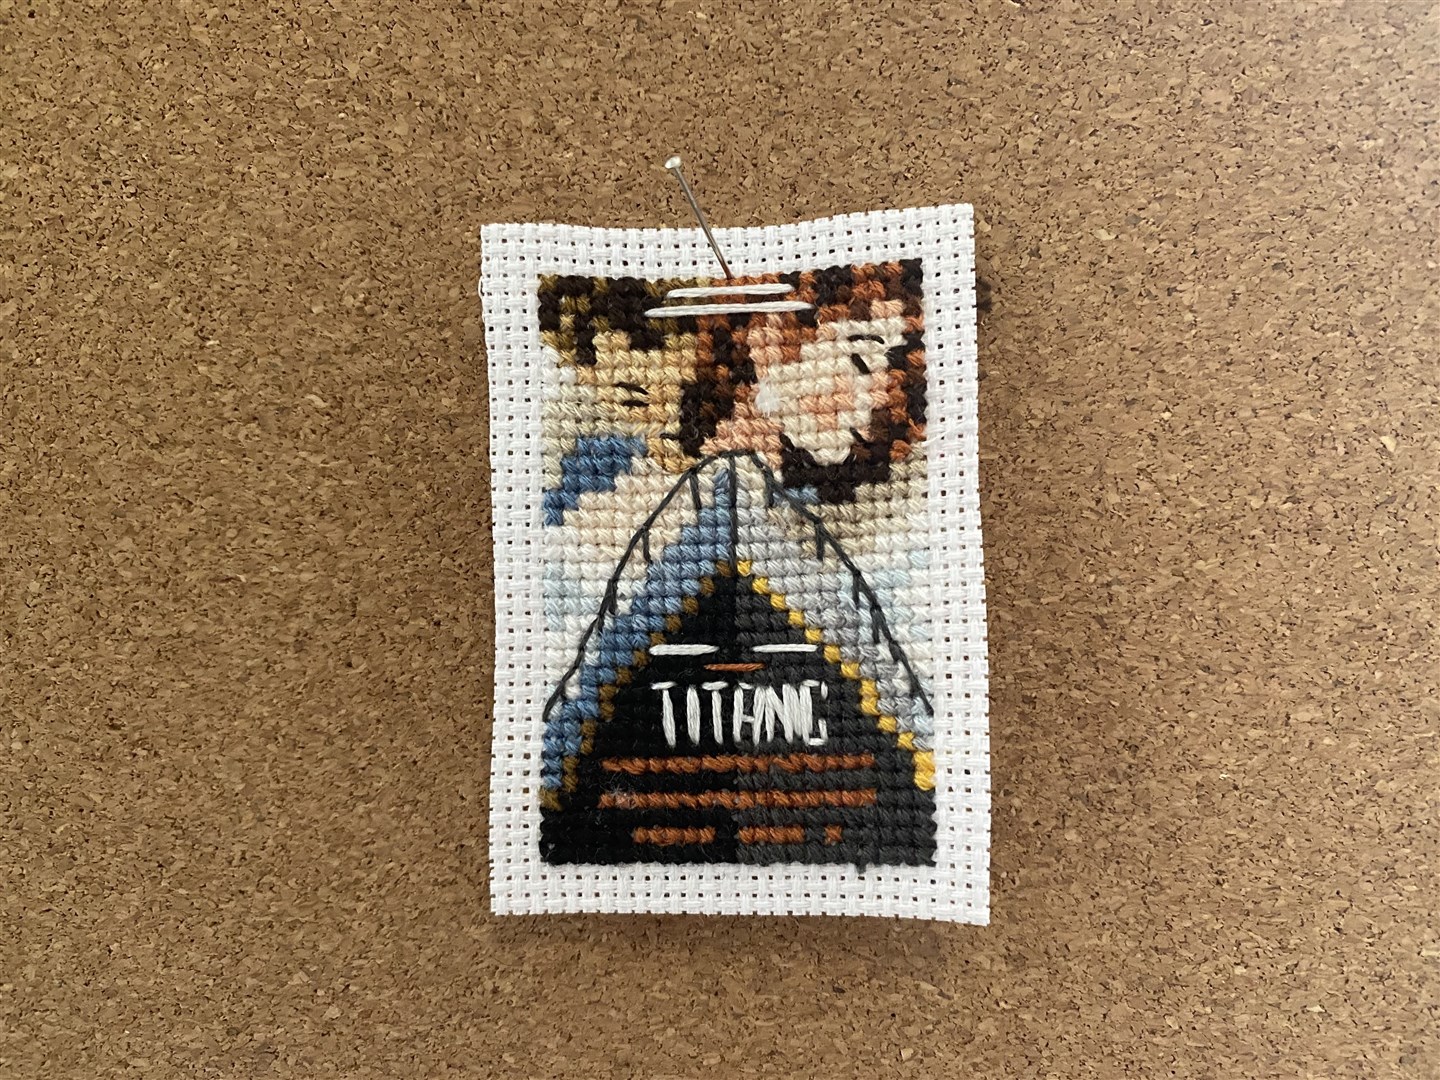 The poster for Titanic in cross-stitch (Victoria McNally/PA)